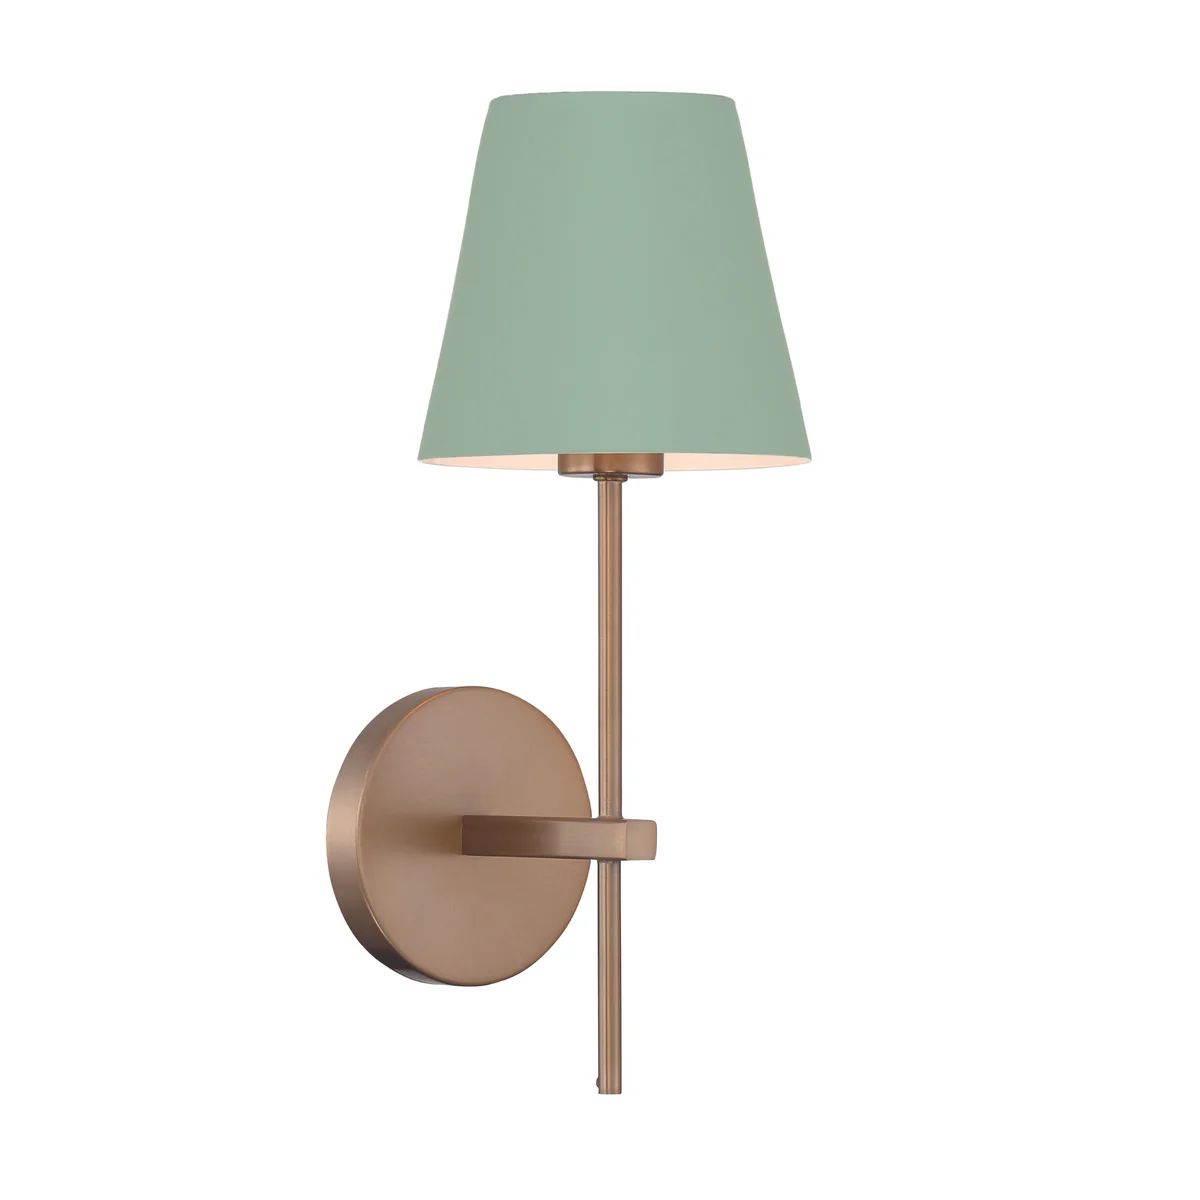 Xavier 1 Light Sconce in Sage Green | The Well Appointed House, LLC